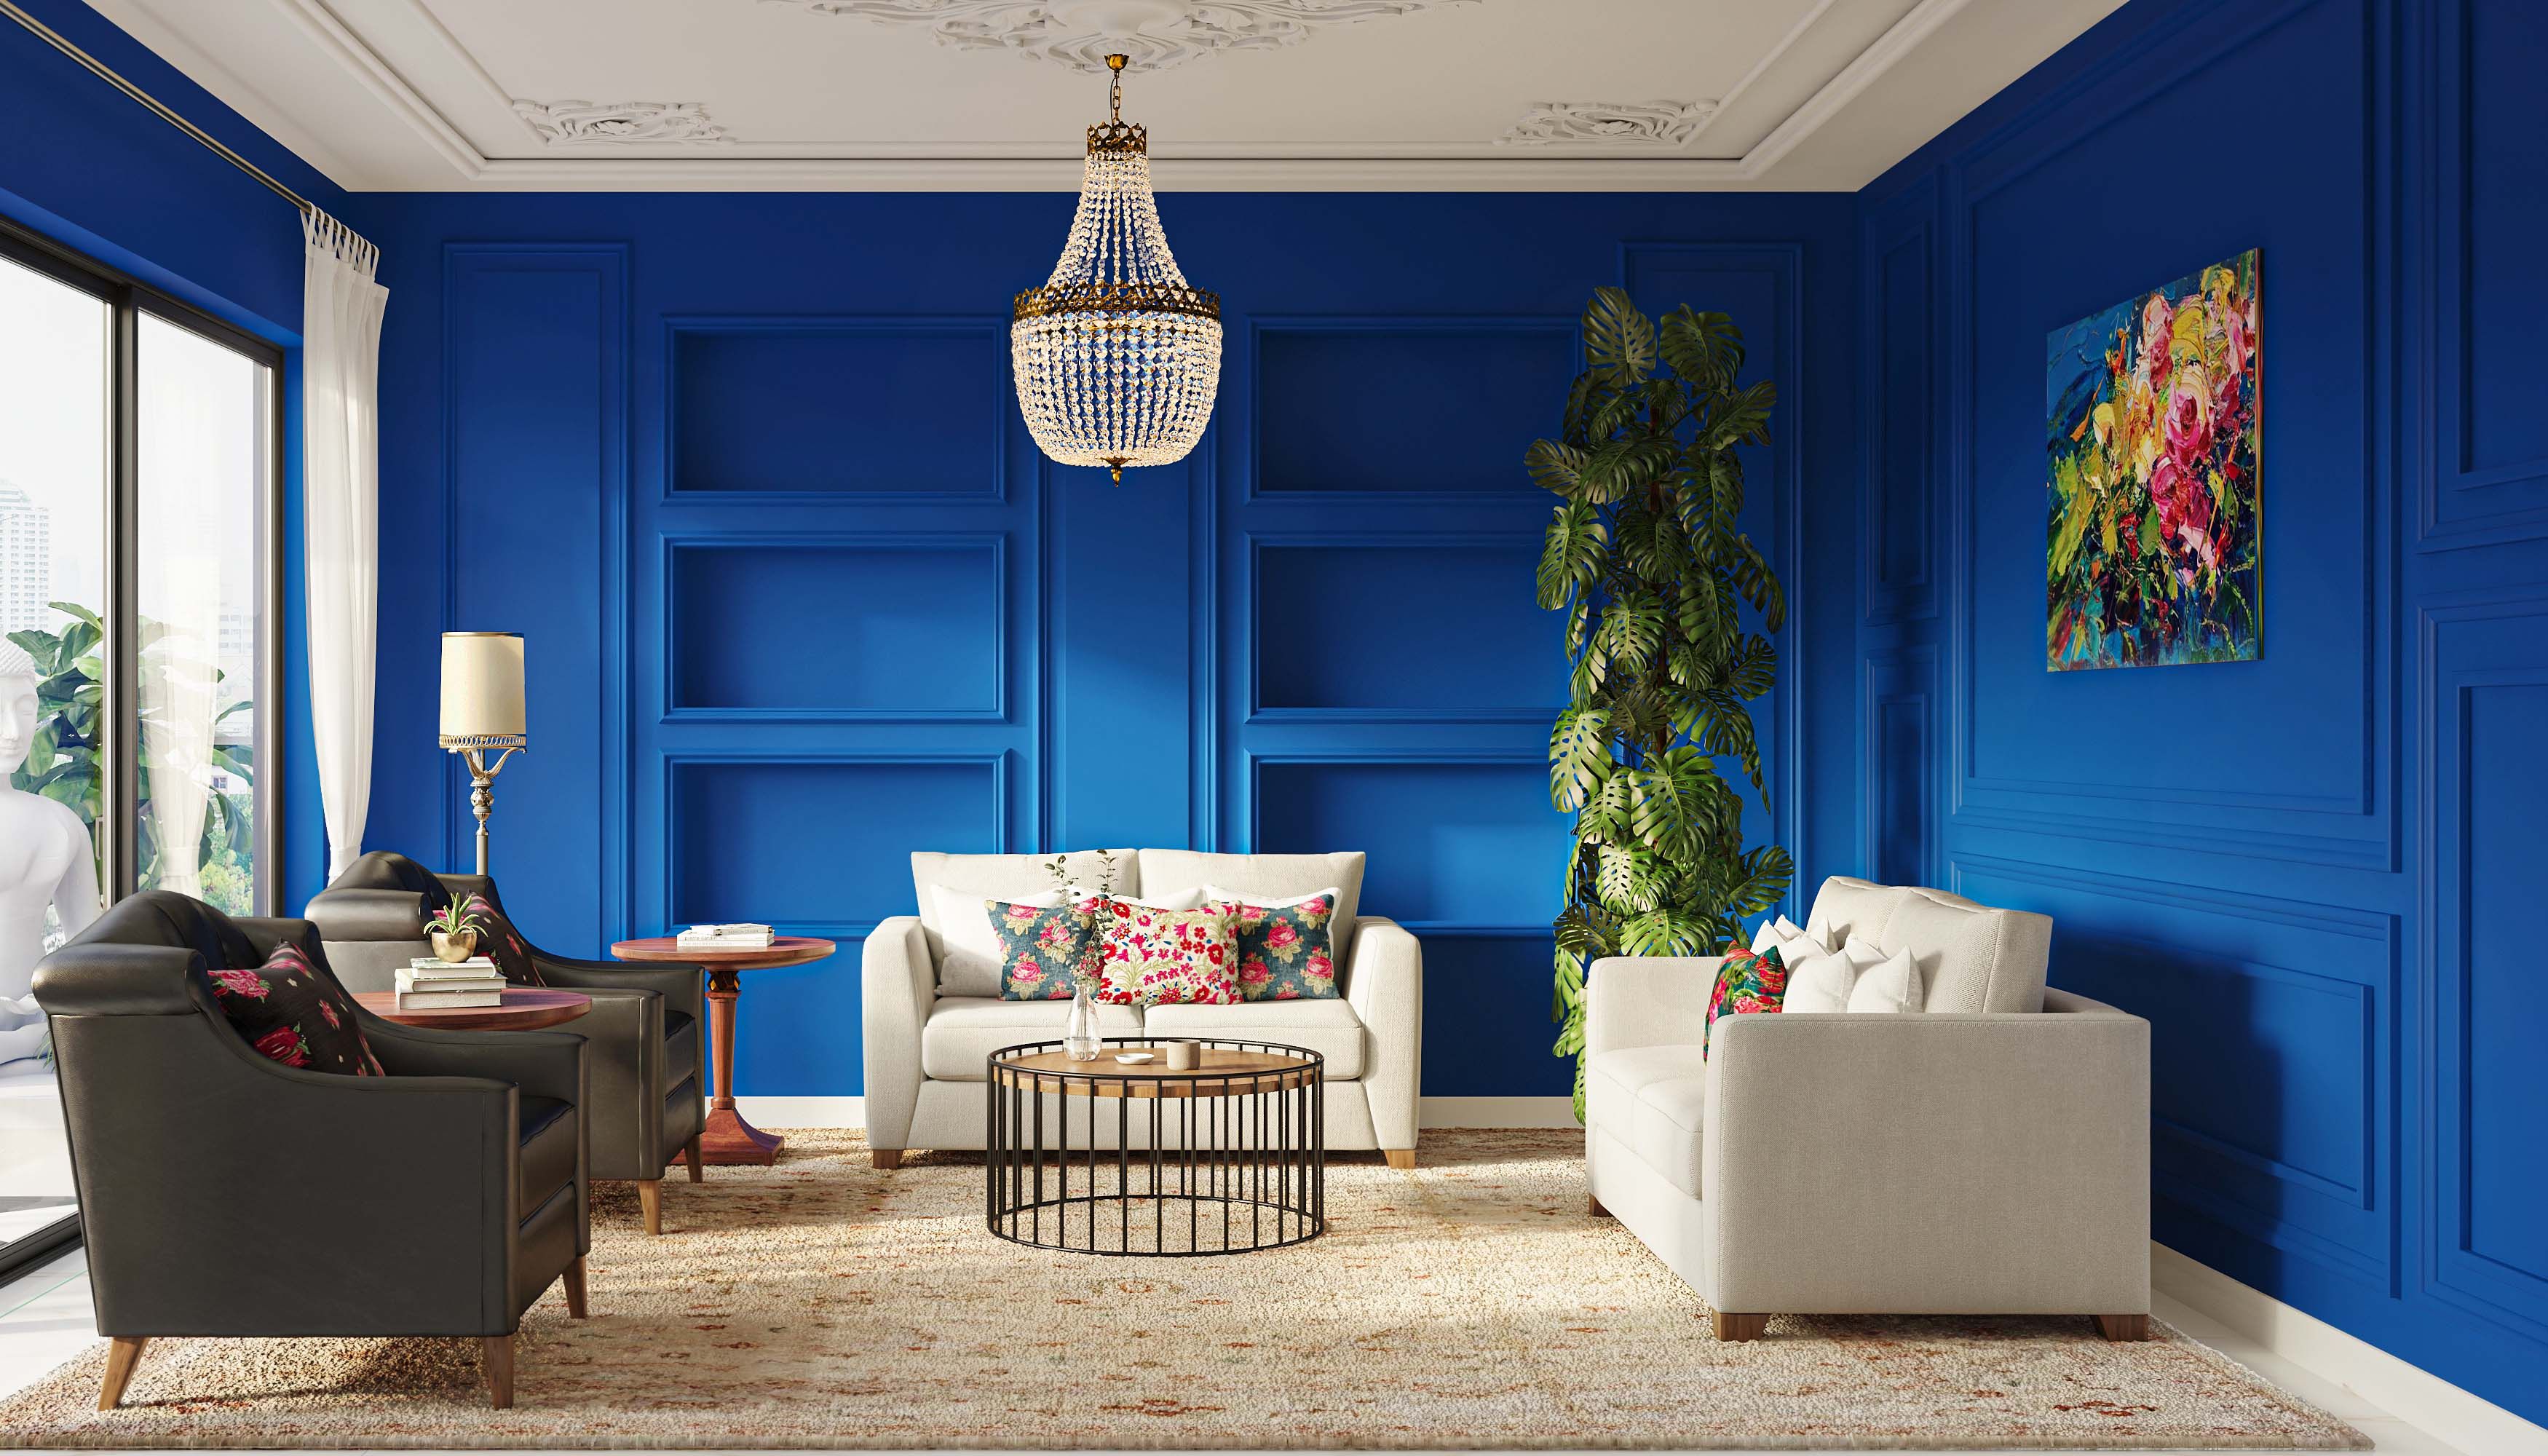 Classic Blue Living Room Wall Design With Boxed Panelling And Wall Trims